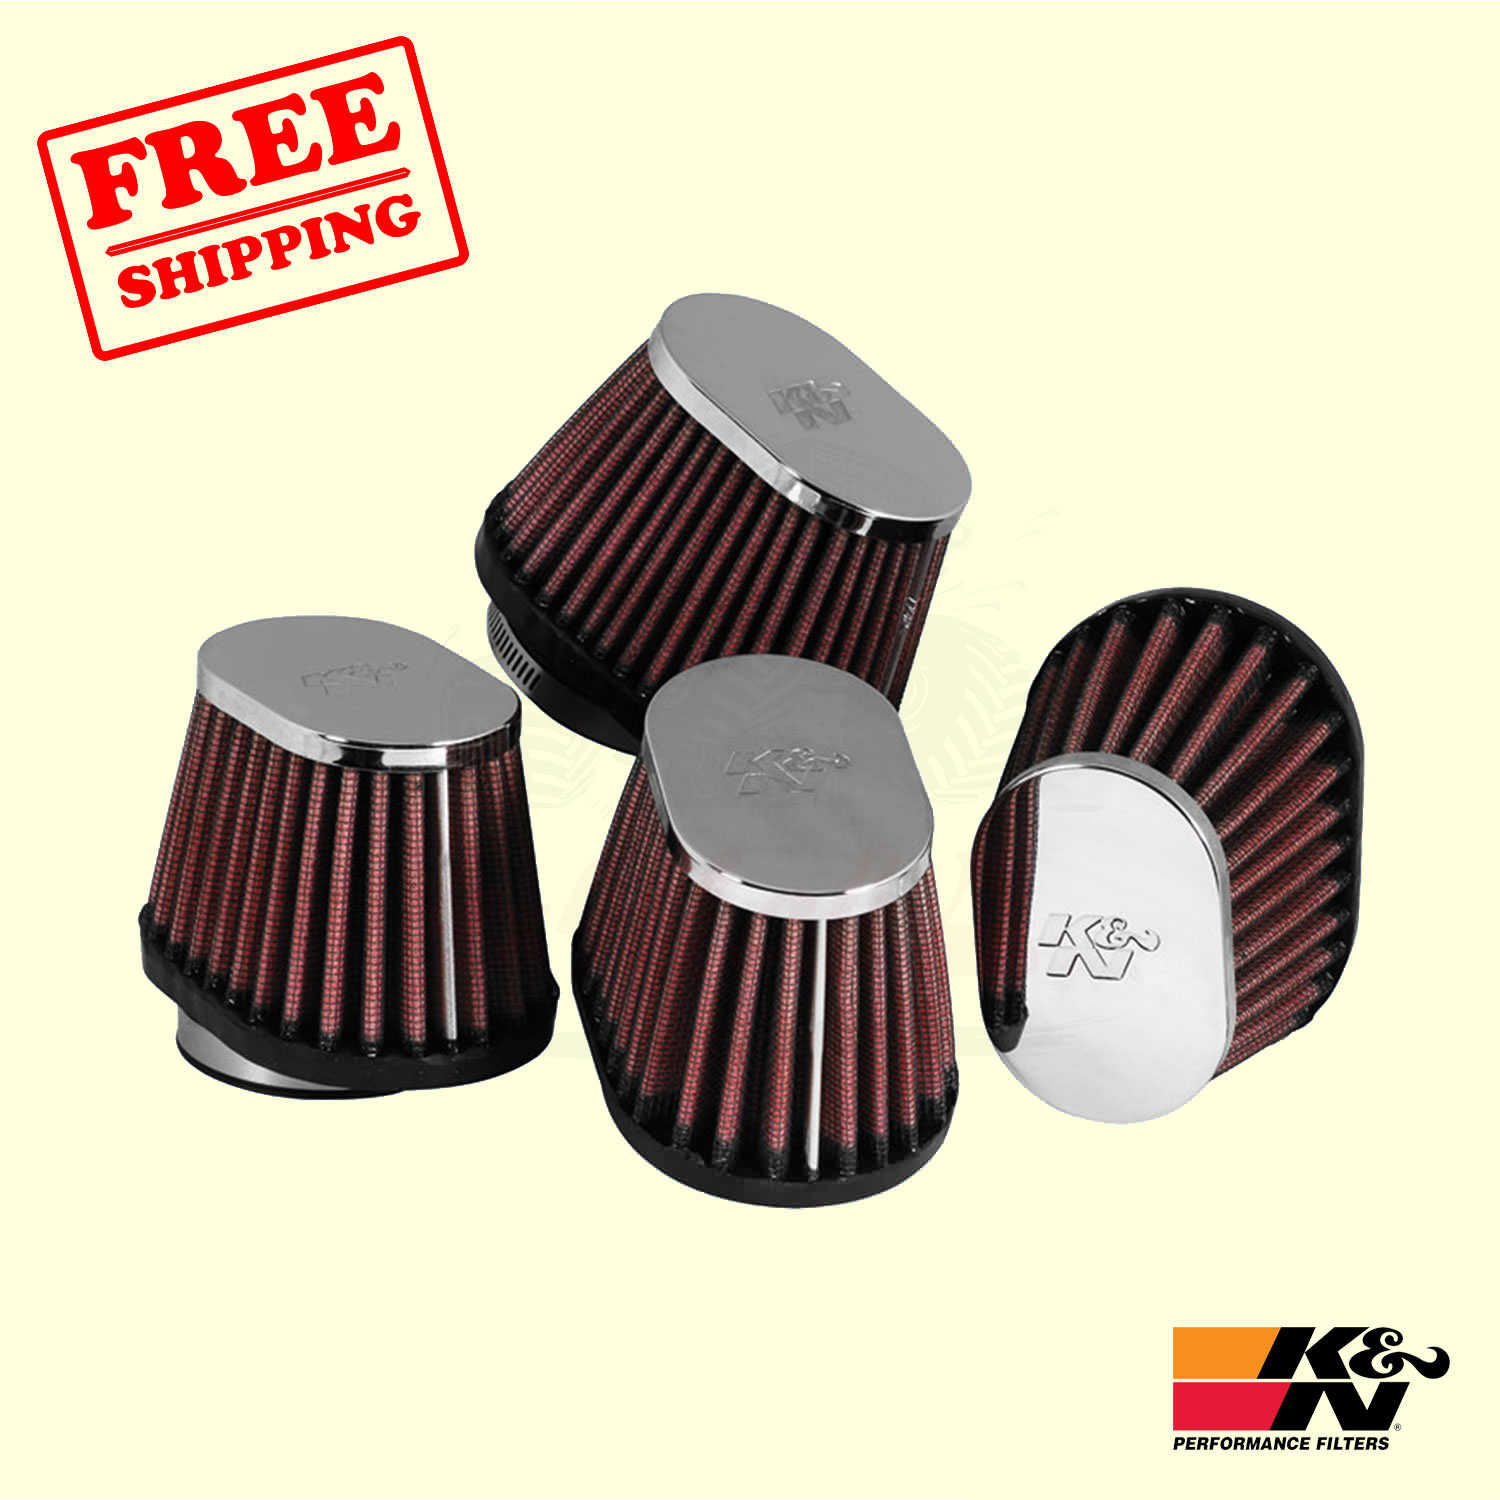 Chrome Filter for Department store Yamaha K&N XJ750R Seca Max 43% OFF 1981-1983